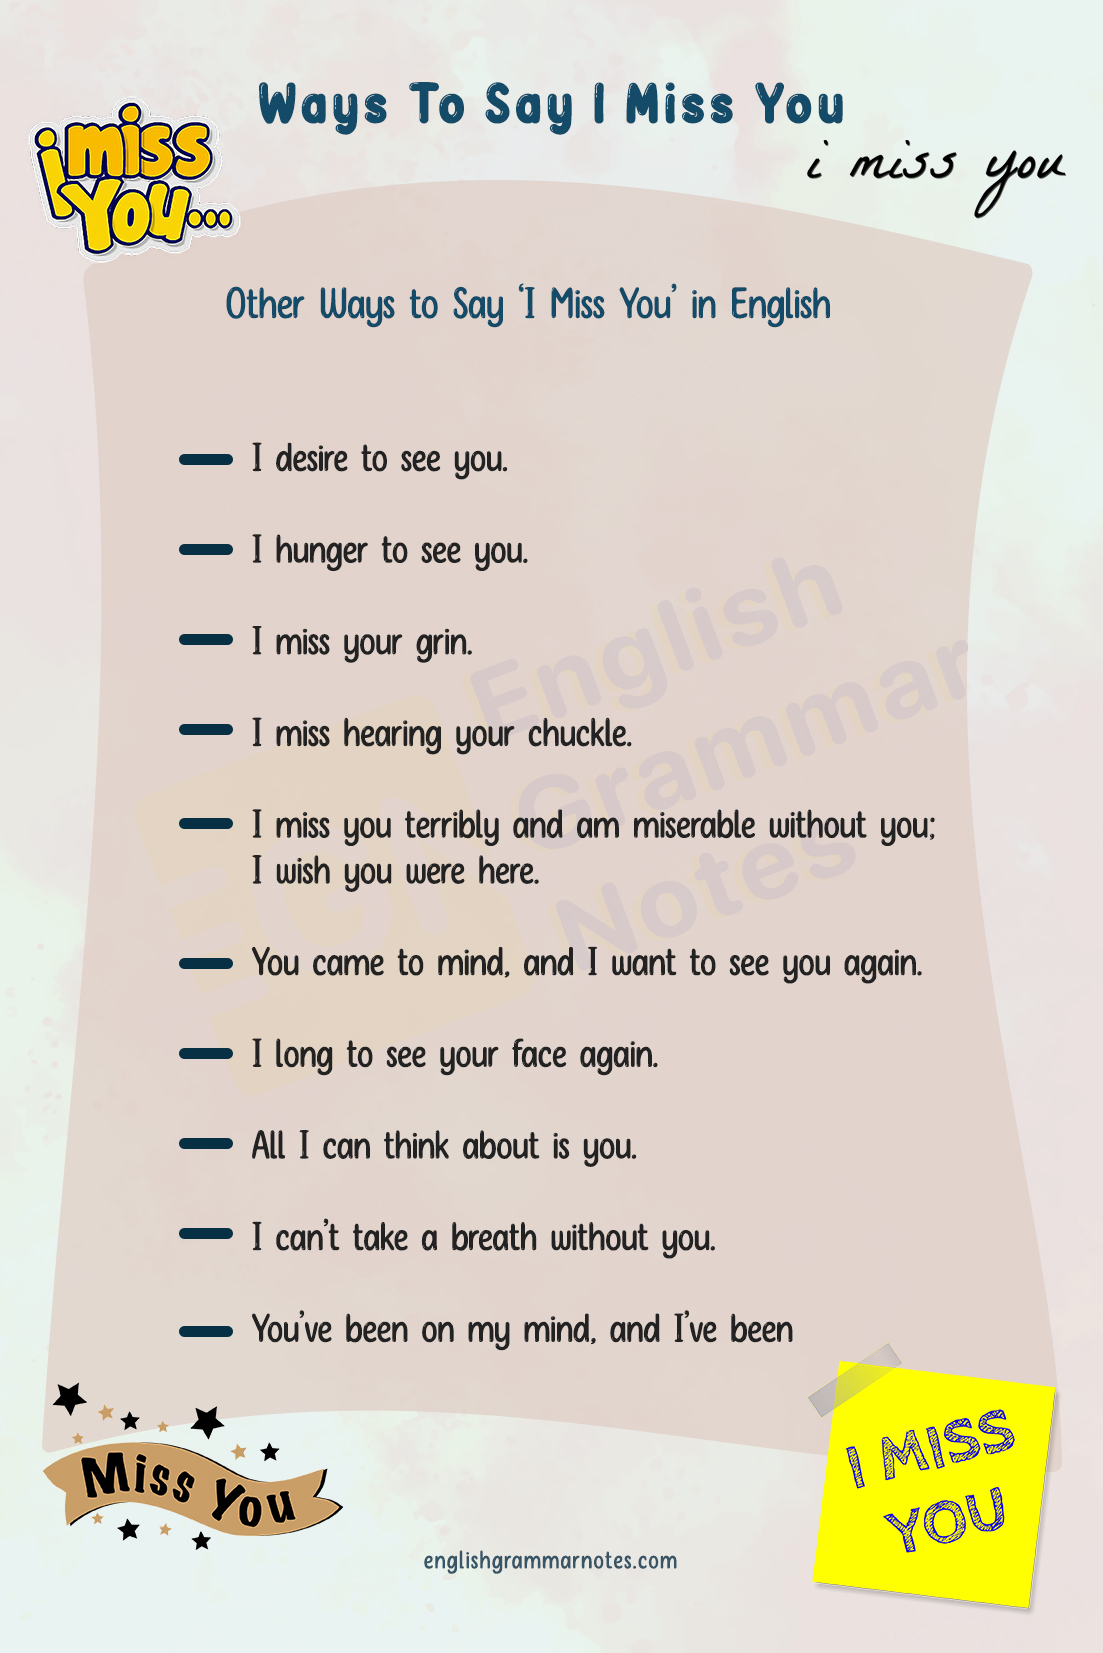 Ways To Say I Miss You 1